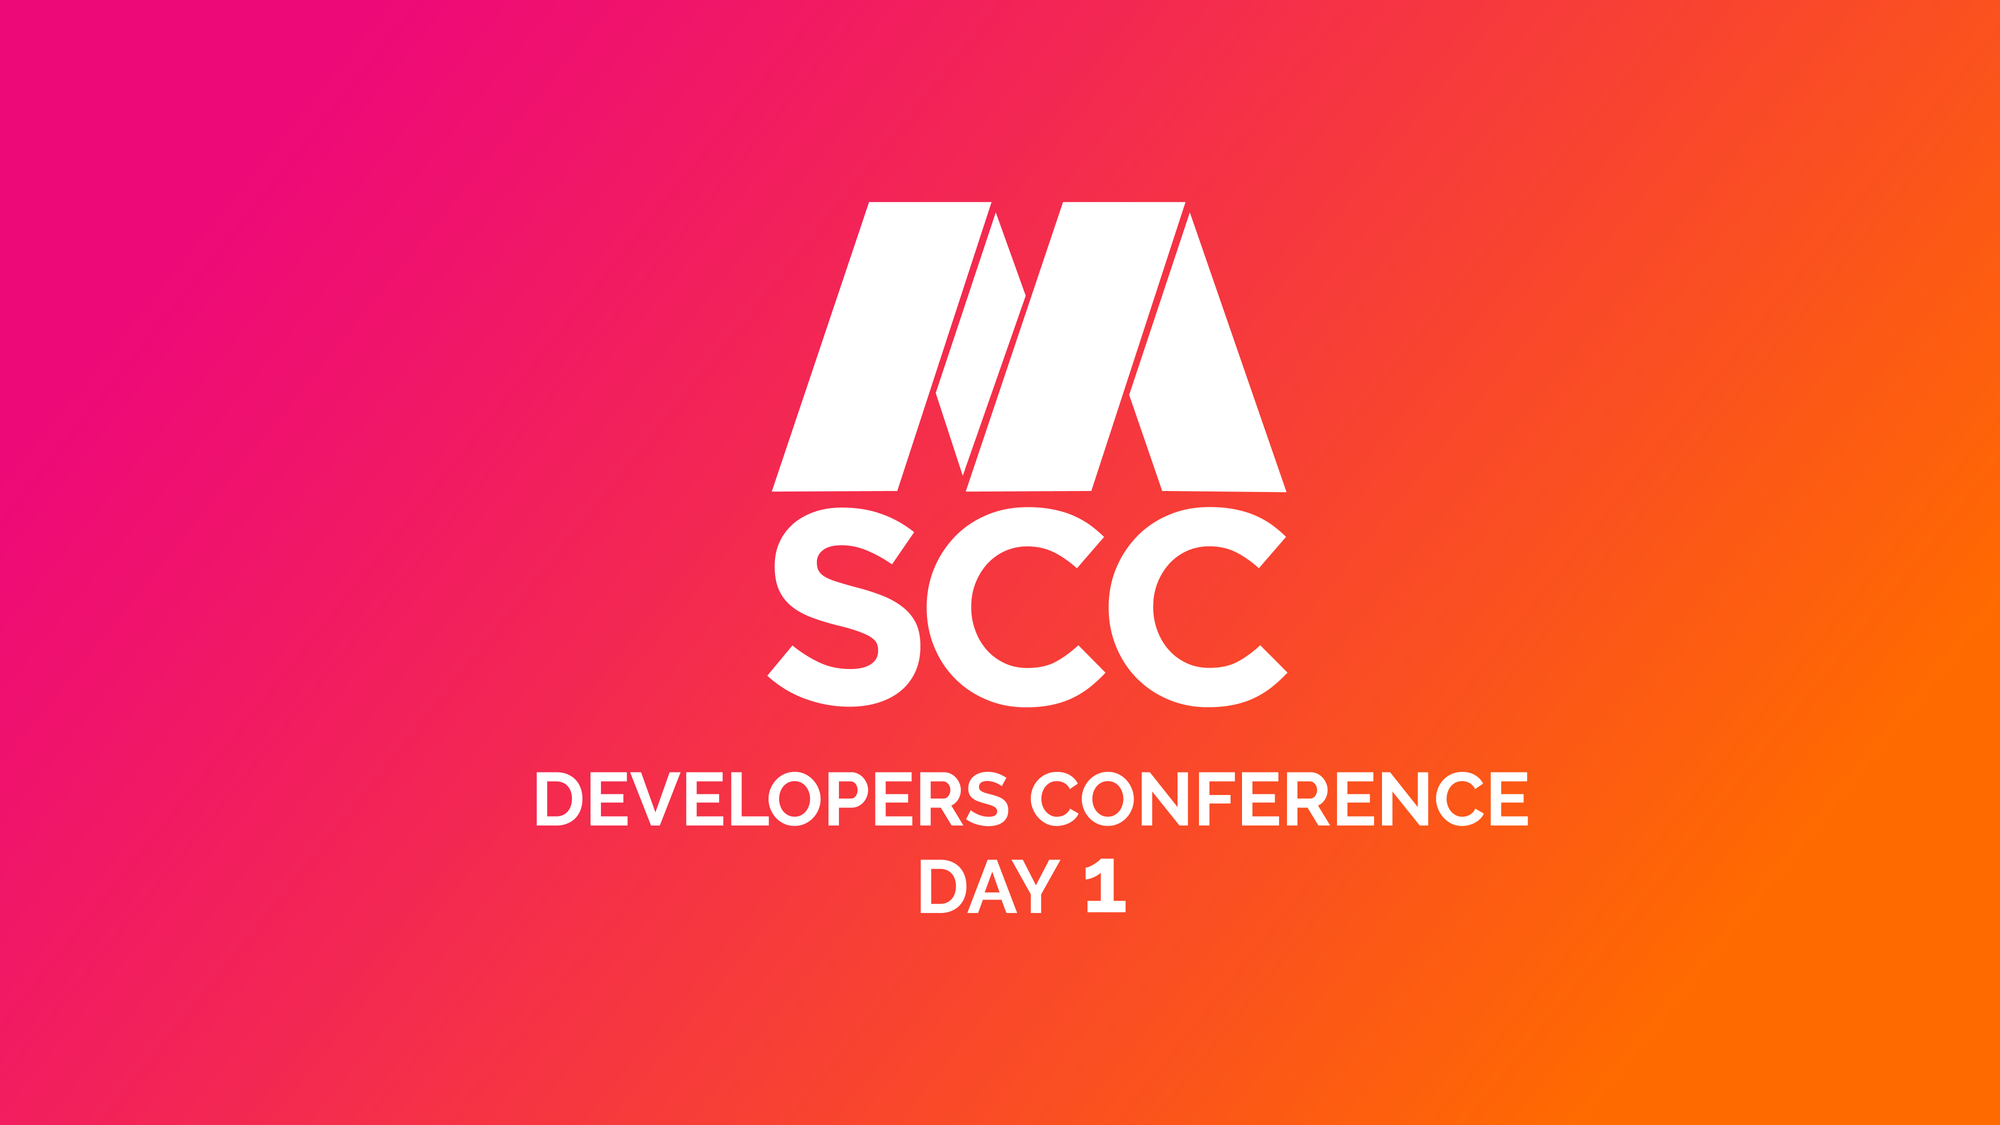 MSCC Developers Conference 2017 - Day 1